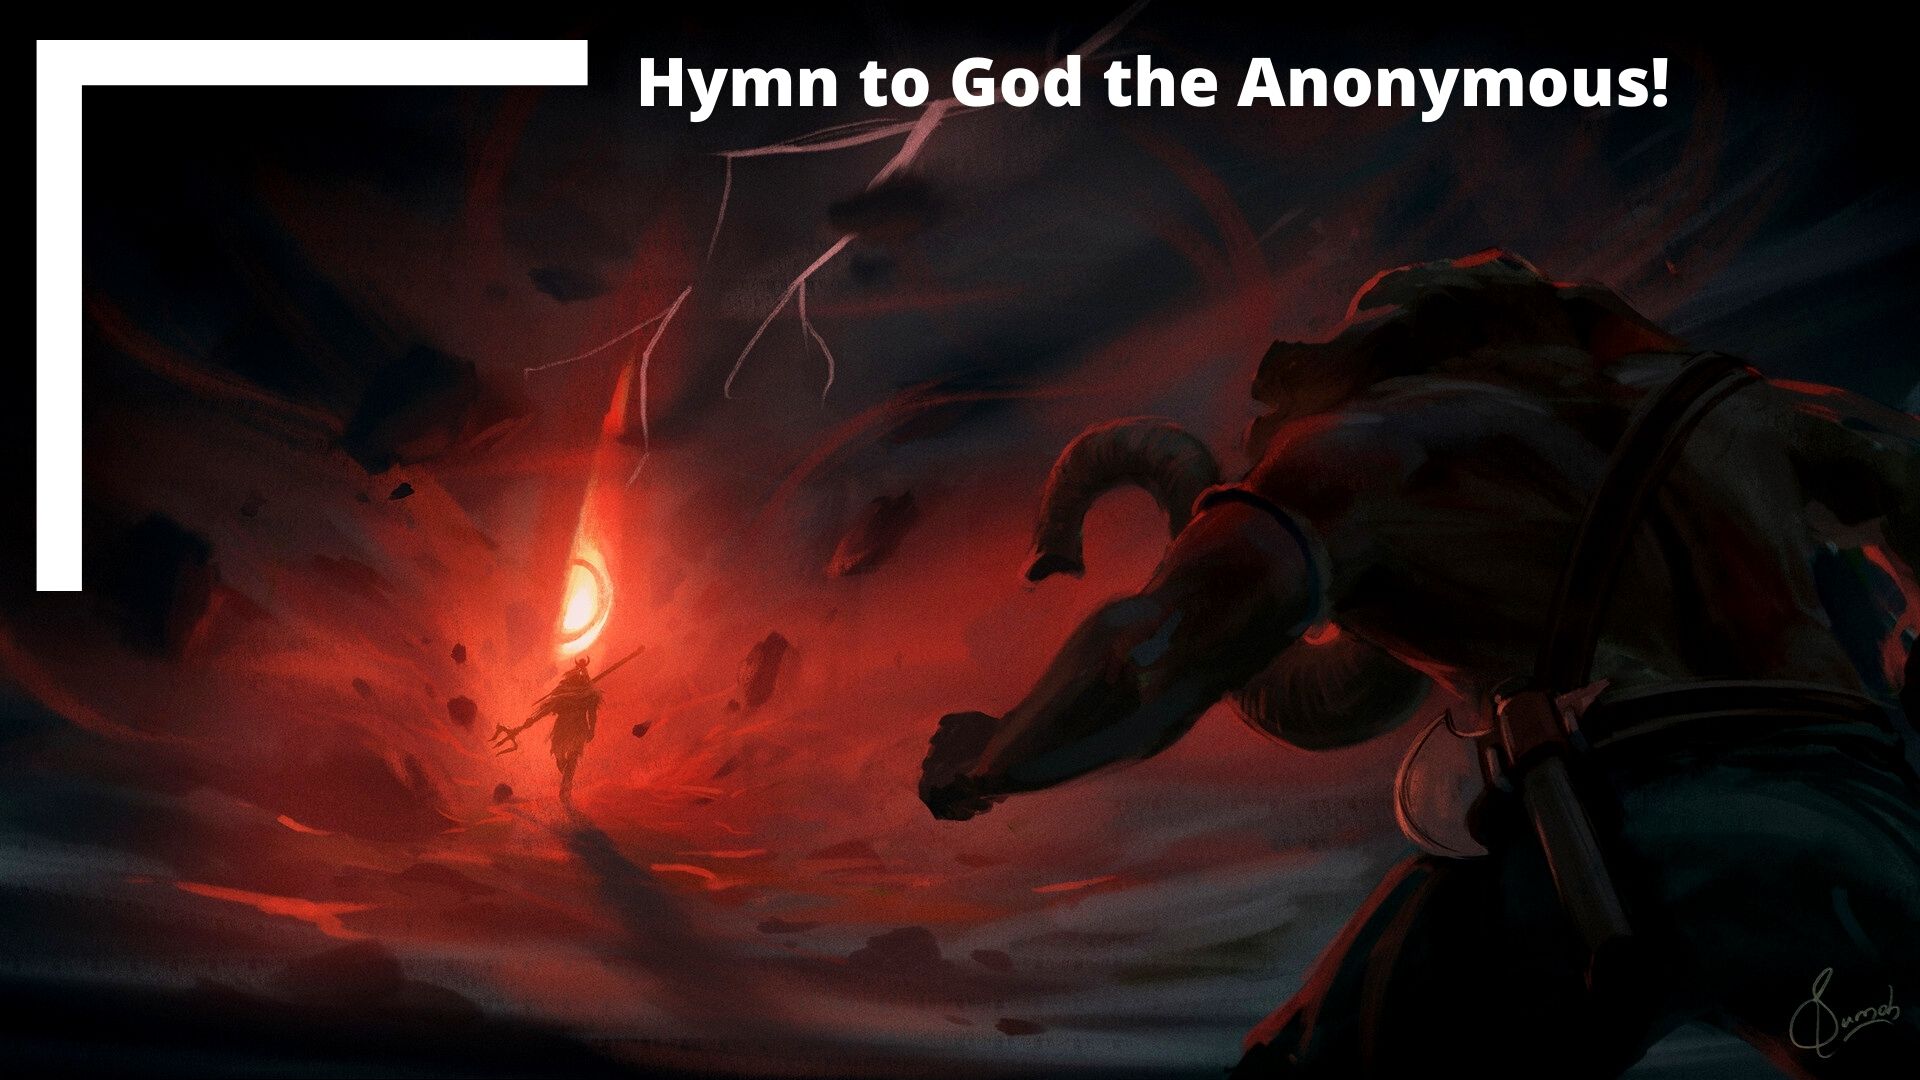 Hymn to god the Anonymous!